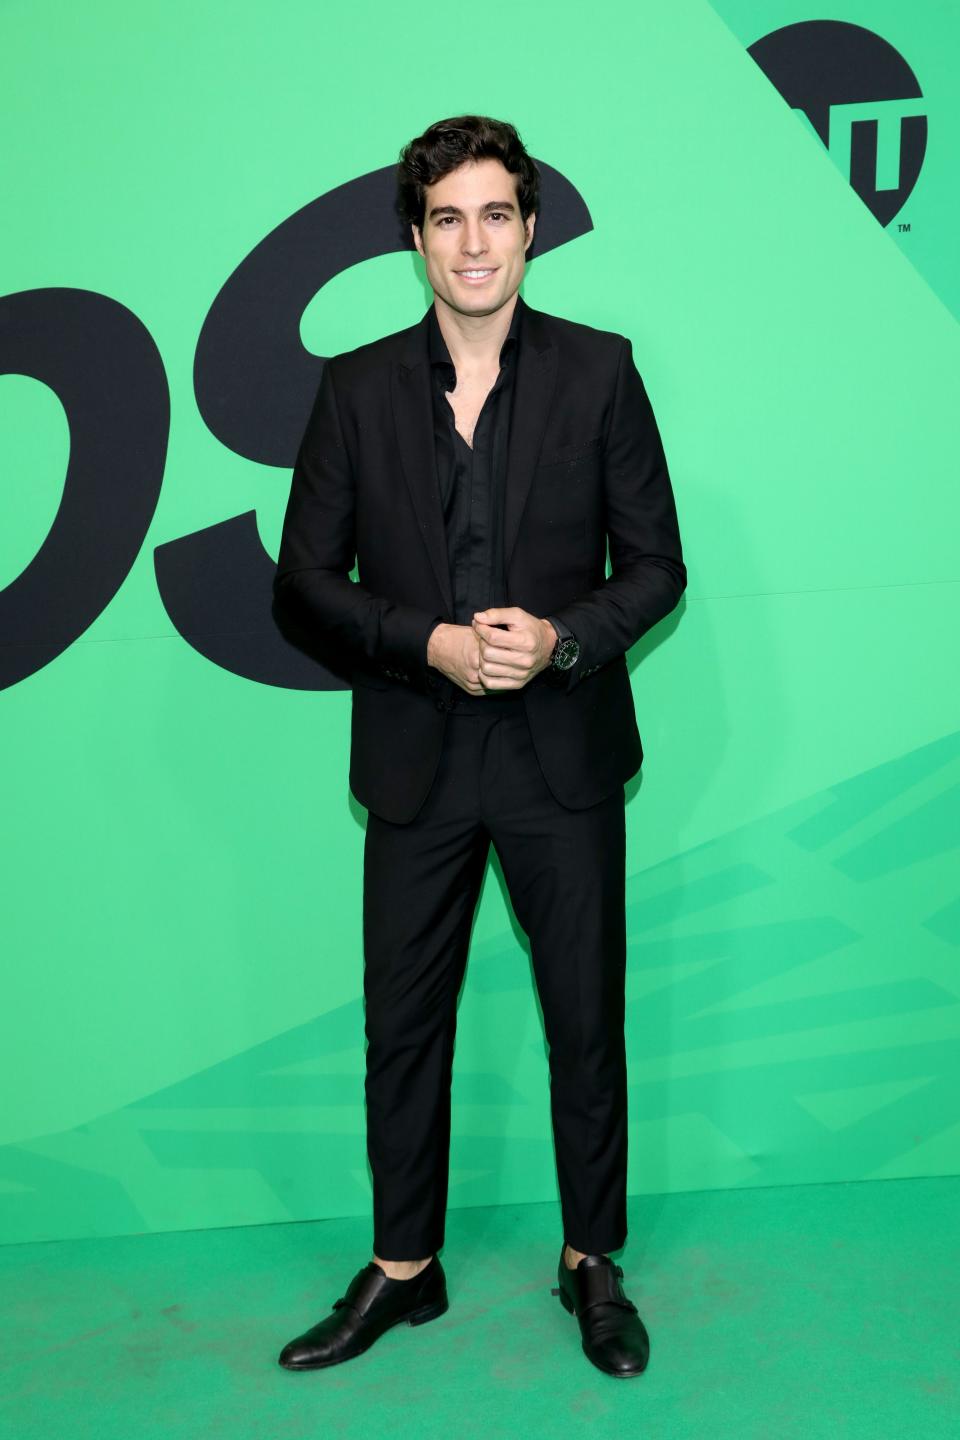 MEXICO CITY, MEXICO - MARCH 05: Danilo Carrera attends the 2020 Spotify Awards at the Auditorio Nacional on March 05, 2020 in Mexico City, Mexico. (Photo by Victor Chavez/Getty Images for Spotify)